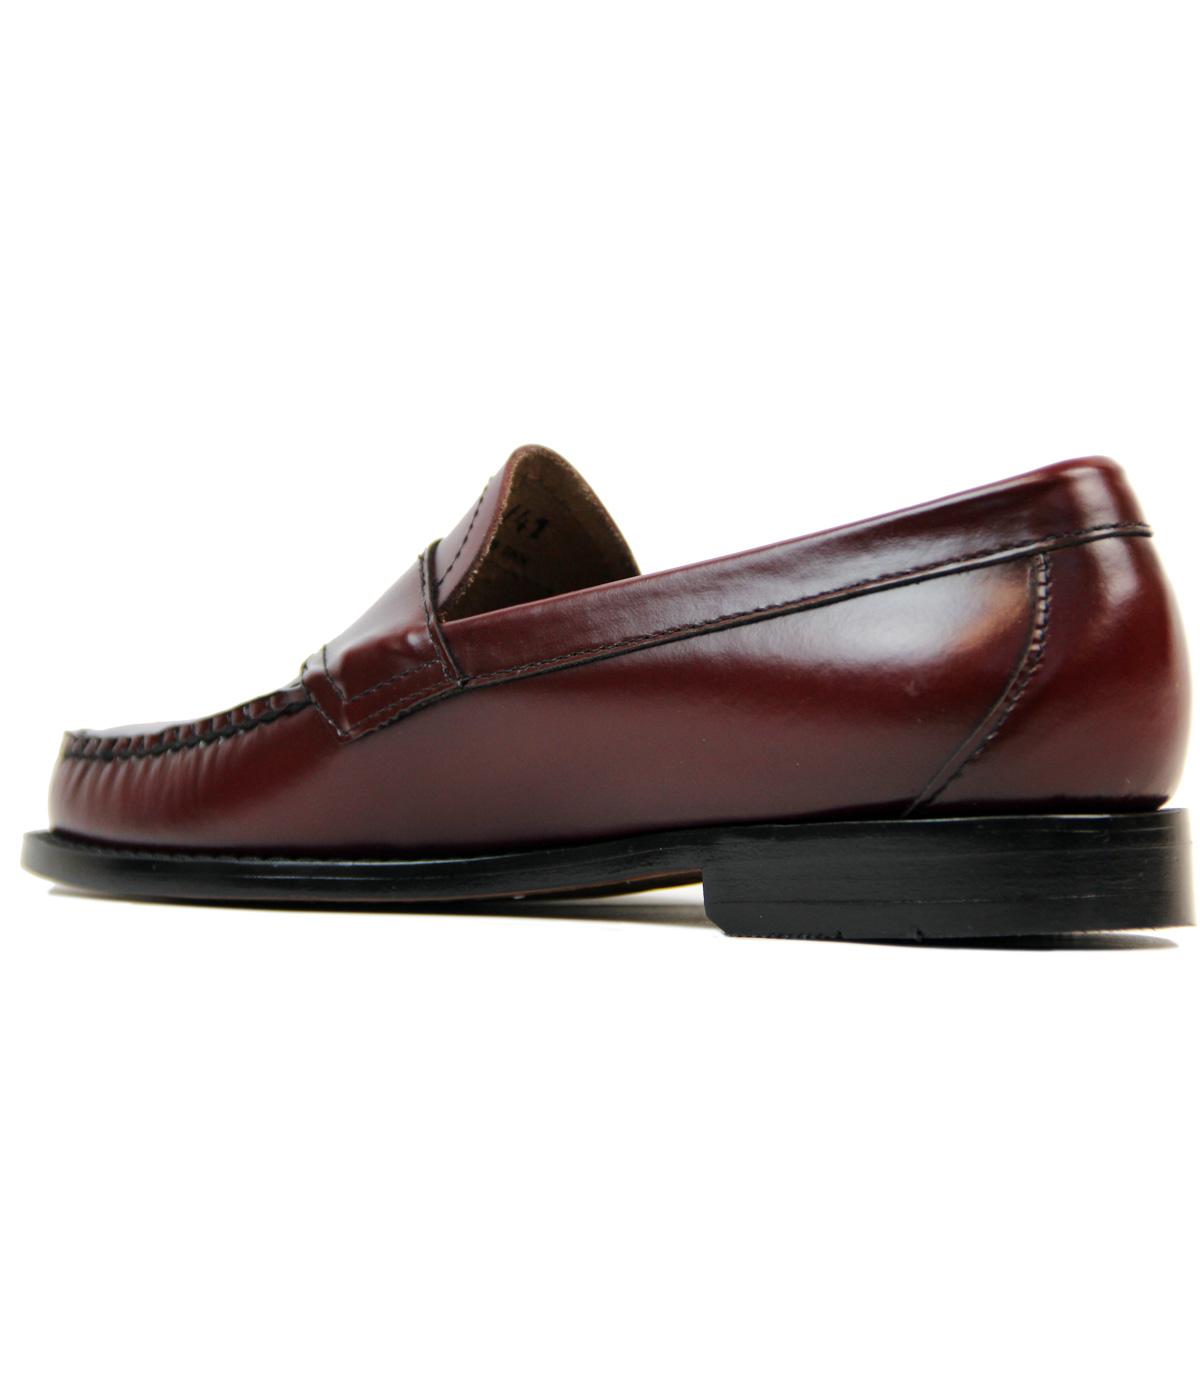 Bass Weejuns Heritage Logan Retro 60s Mod Penny Loafers in Wine